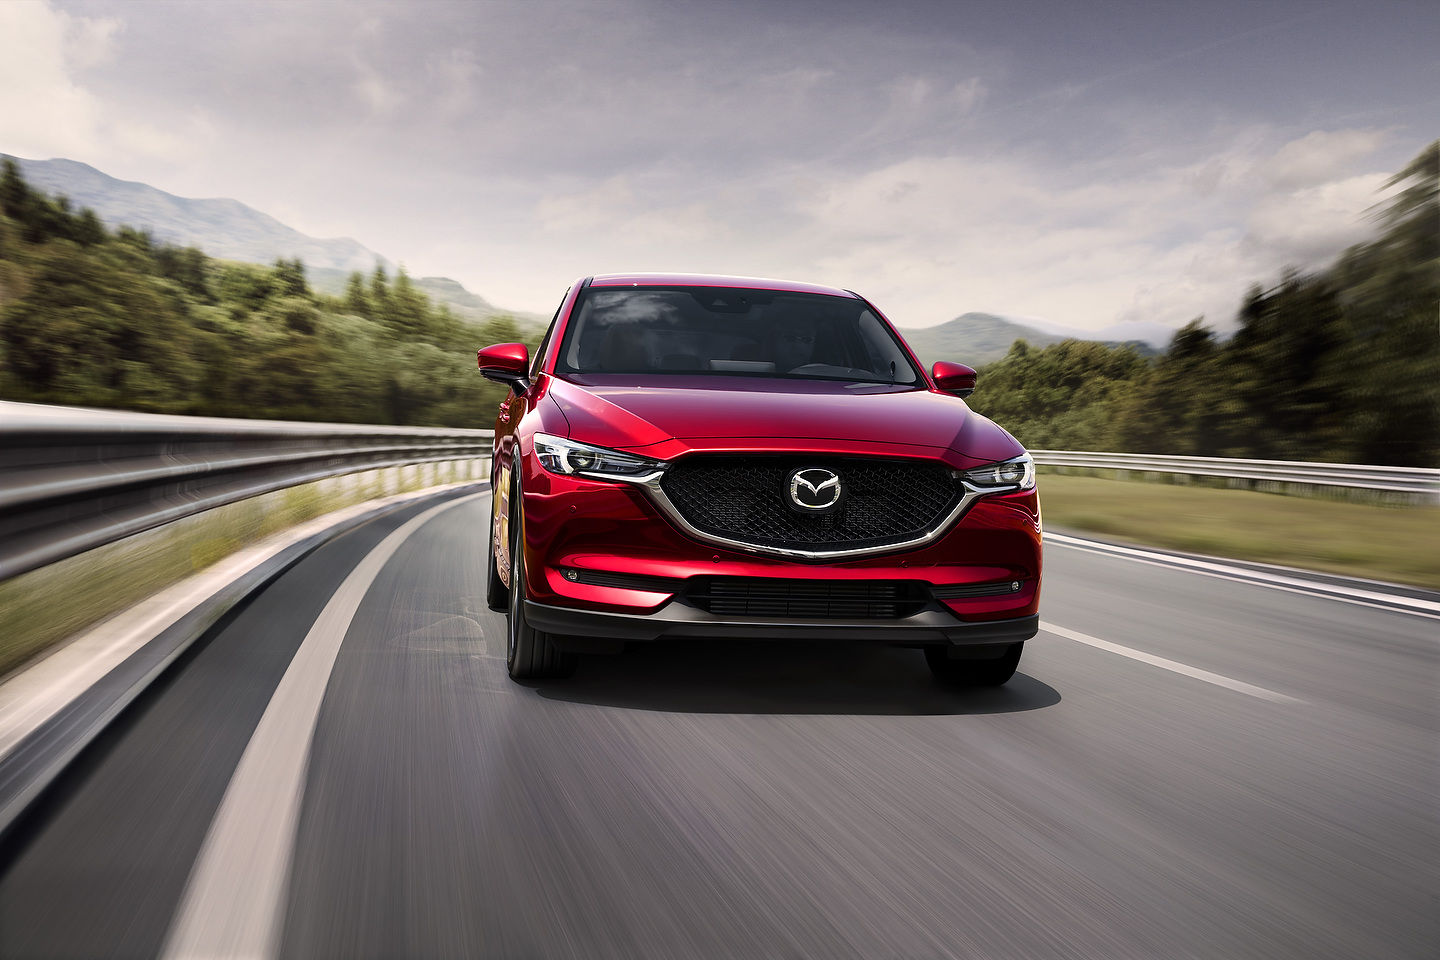 Three reasons why you should consider the 2021 Mazda CX-5